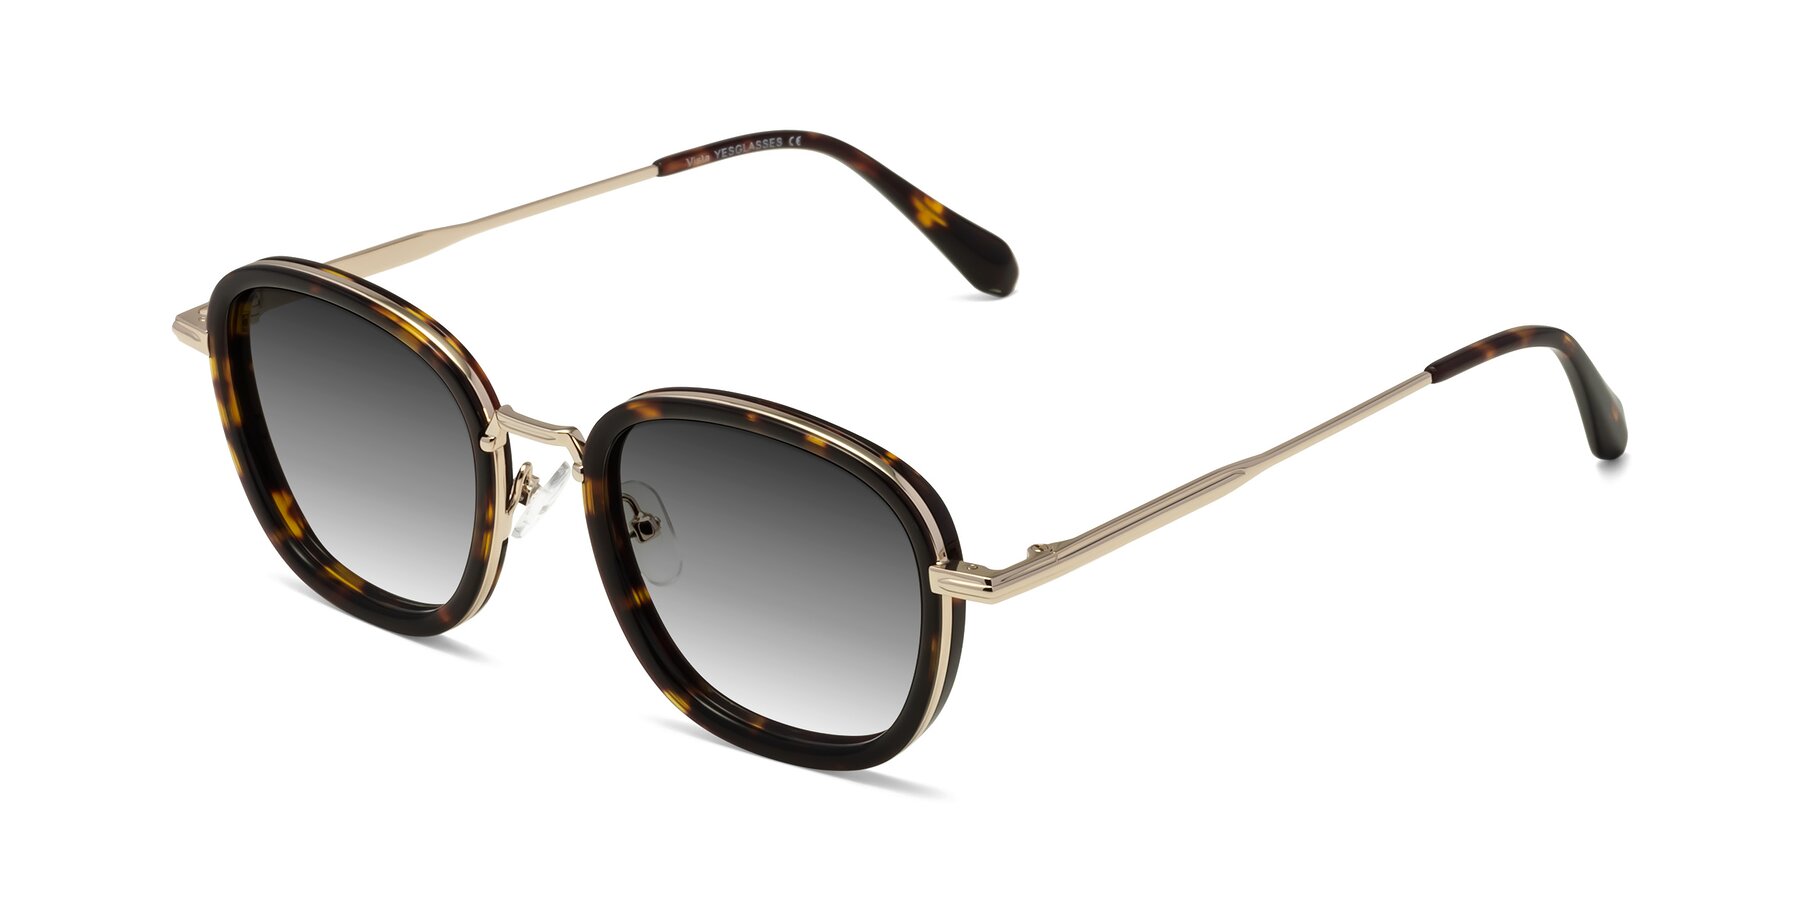 Angle of Vista in Tortoise-Light Gold with Gray Gradient Lenses